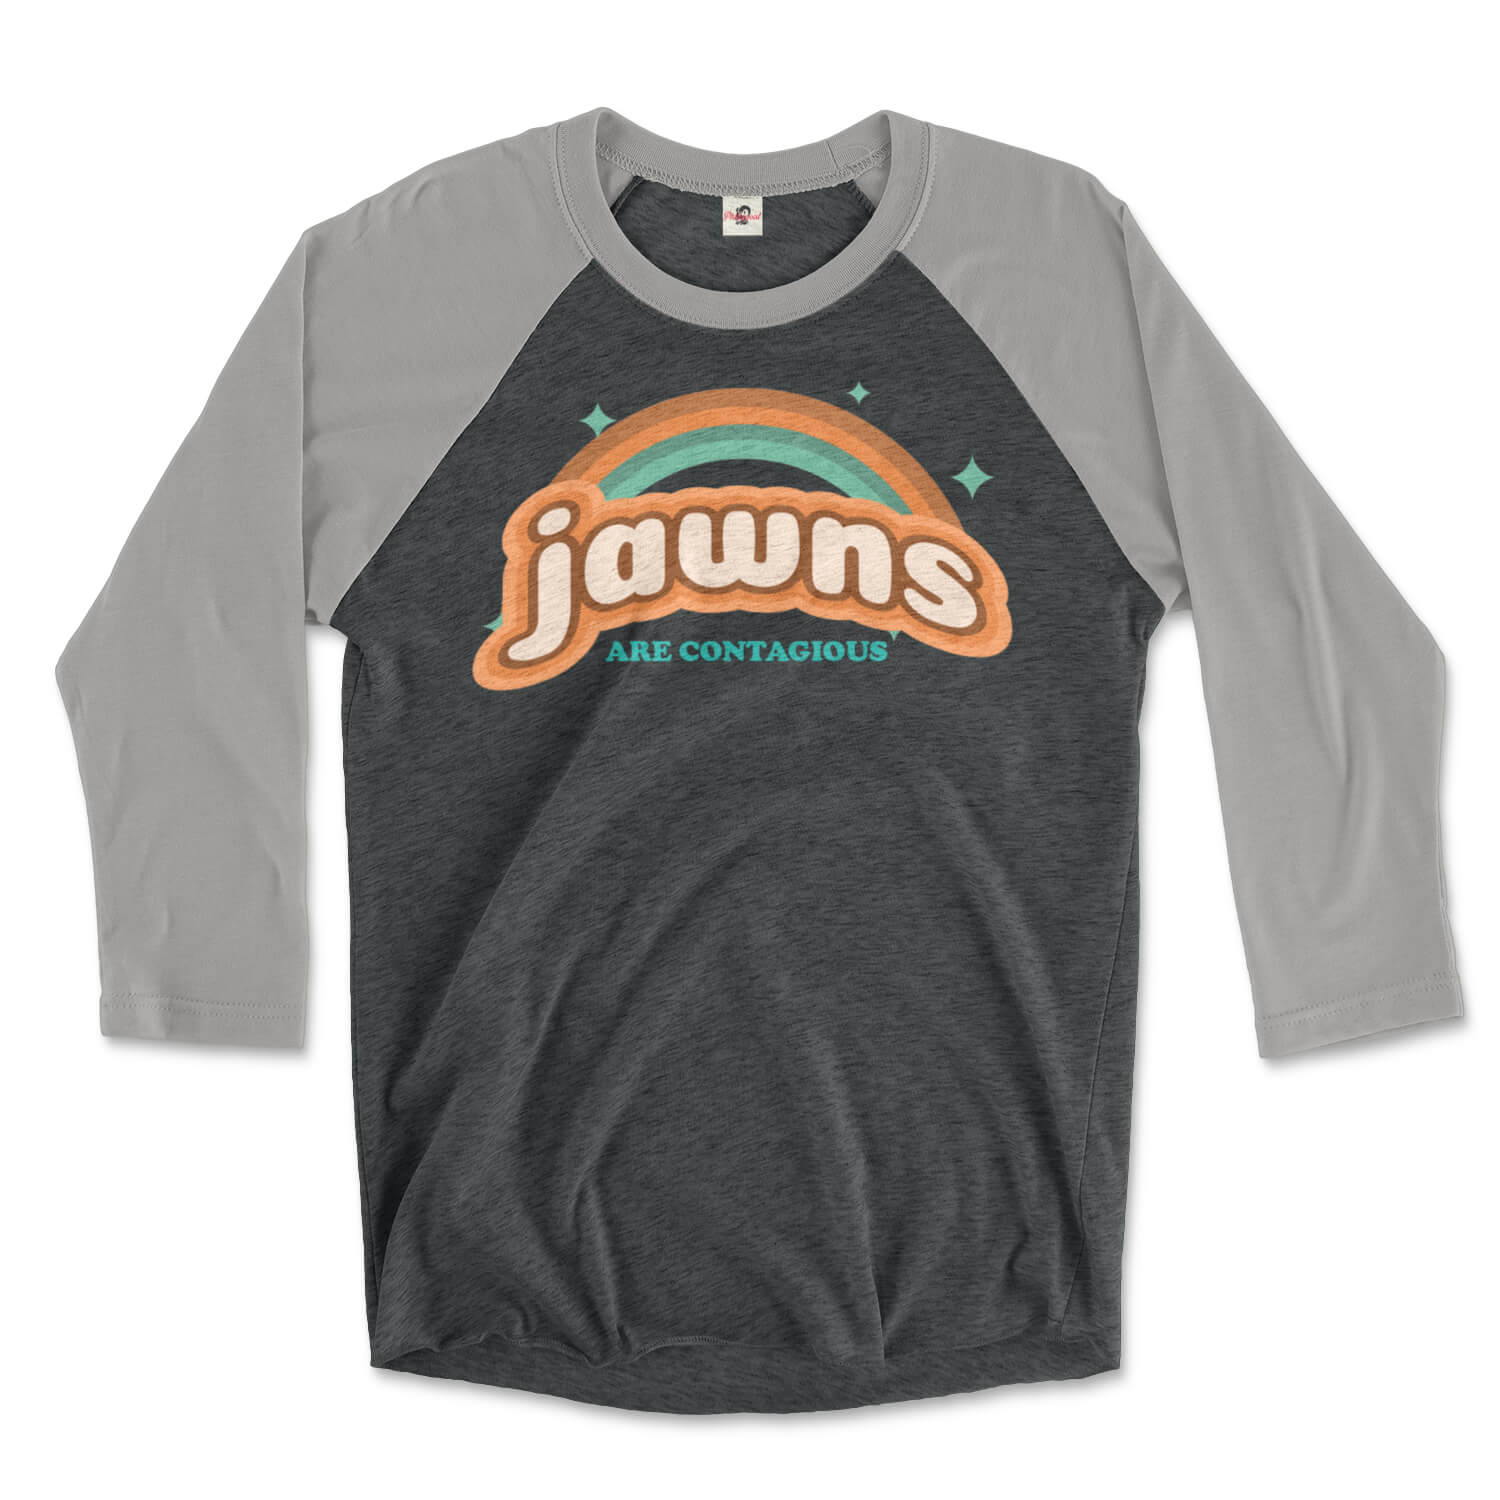 Philadelphia jawns are contagious rainbow design on a heather grey and vintage black triblend raglan tee from Phillygoat